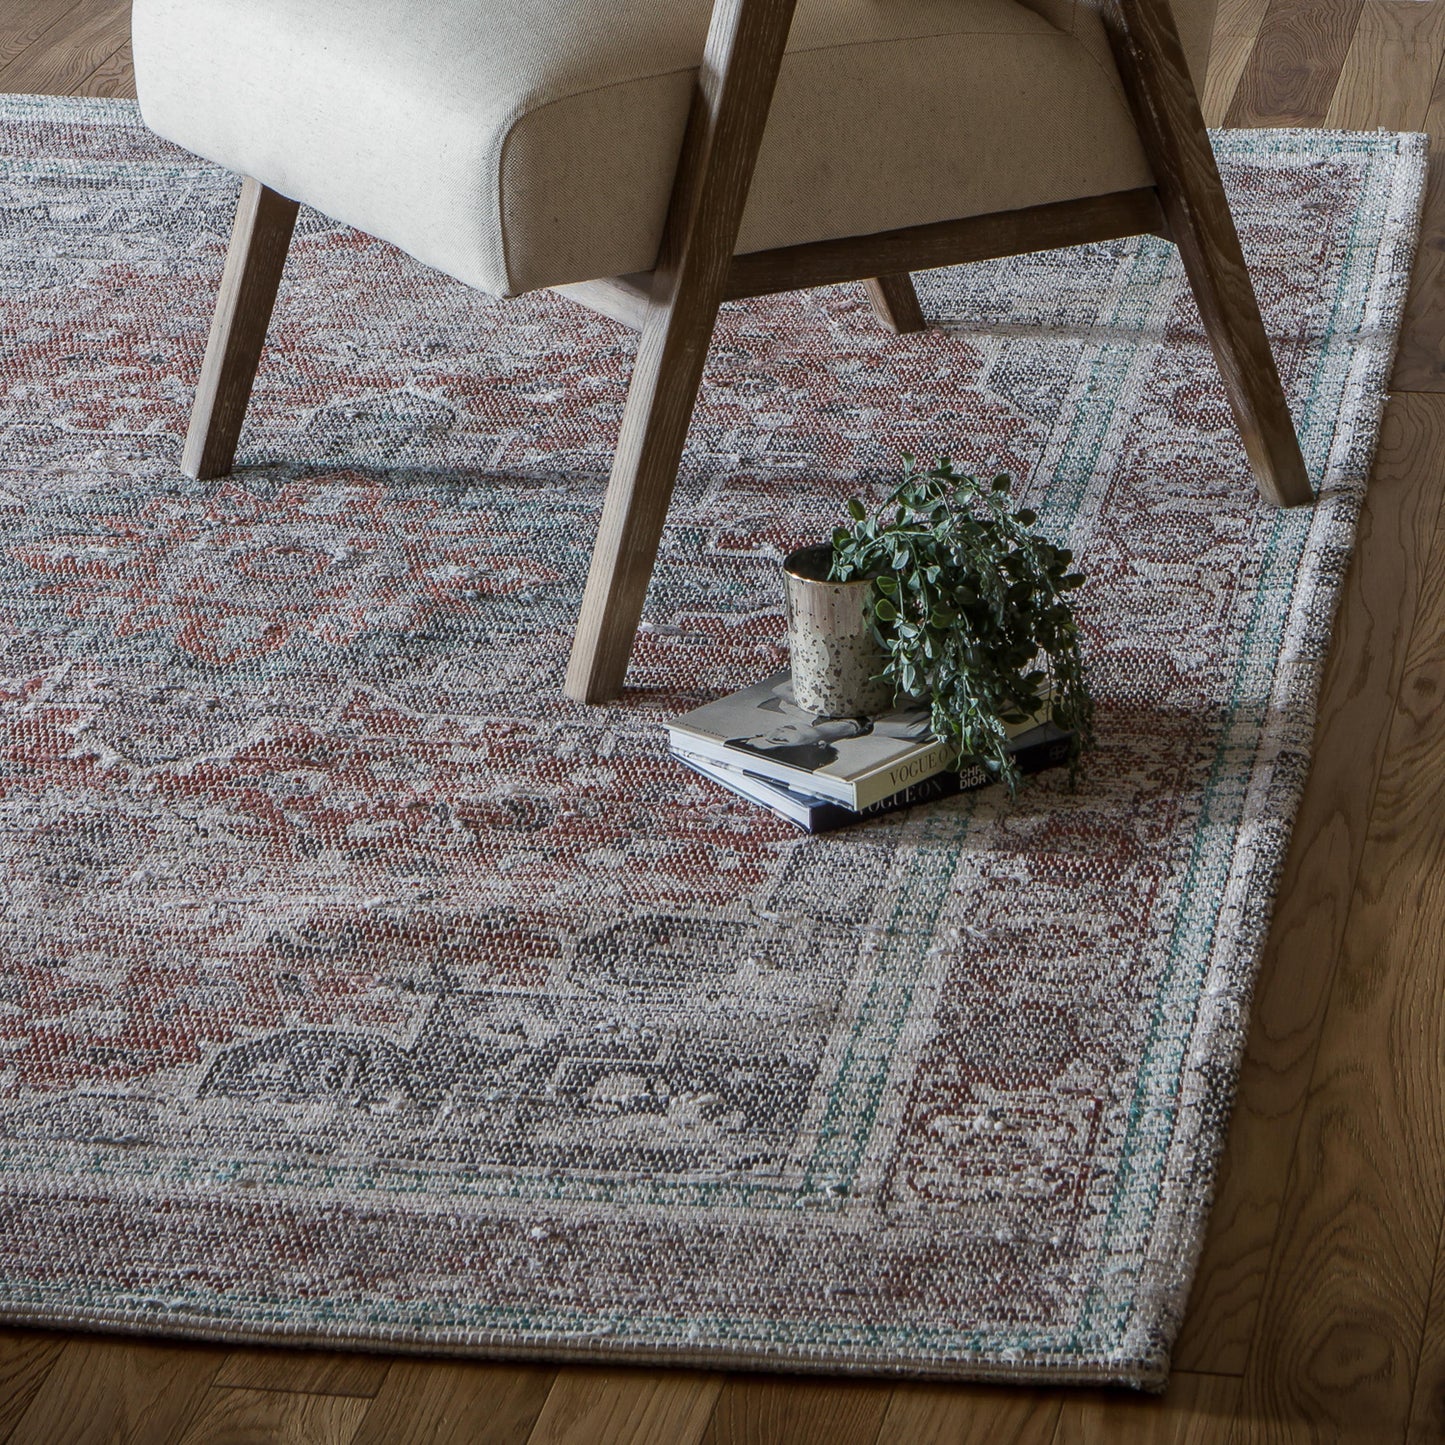 An Allaleigh Rug 1600x2300mm from Kikiathome.co.uk, a home furniture and interior decor addition, in a living room with a chair and a plant.